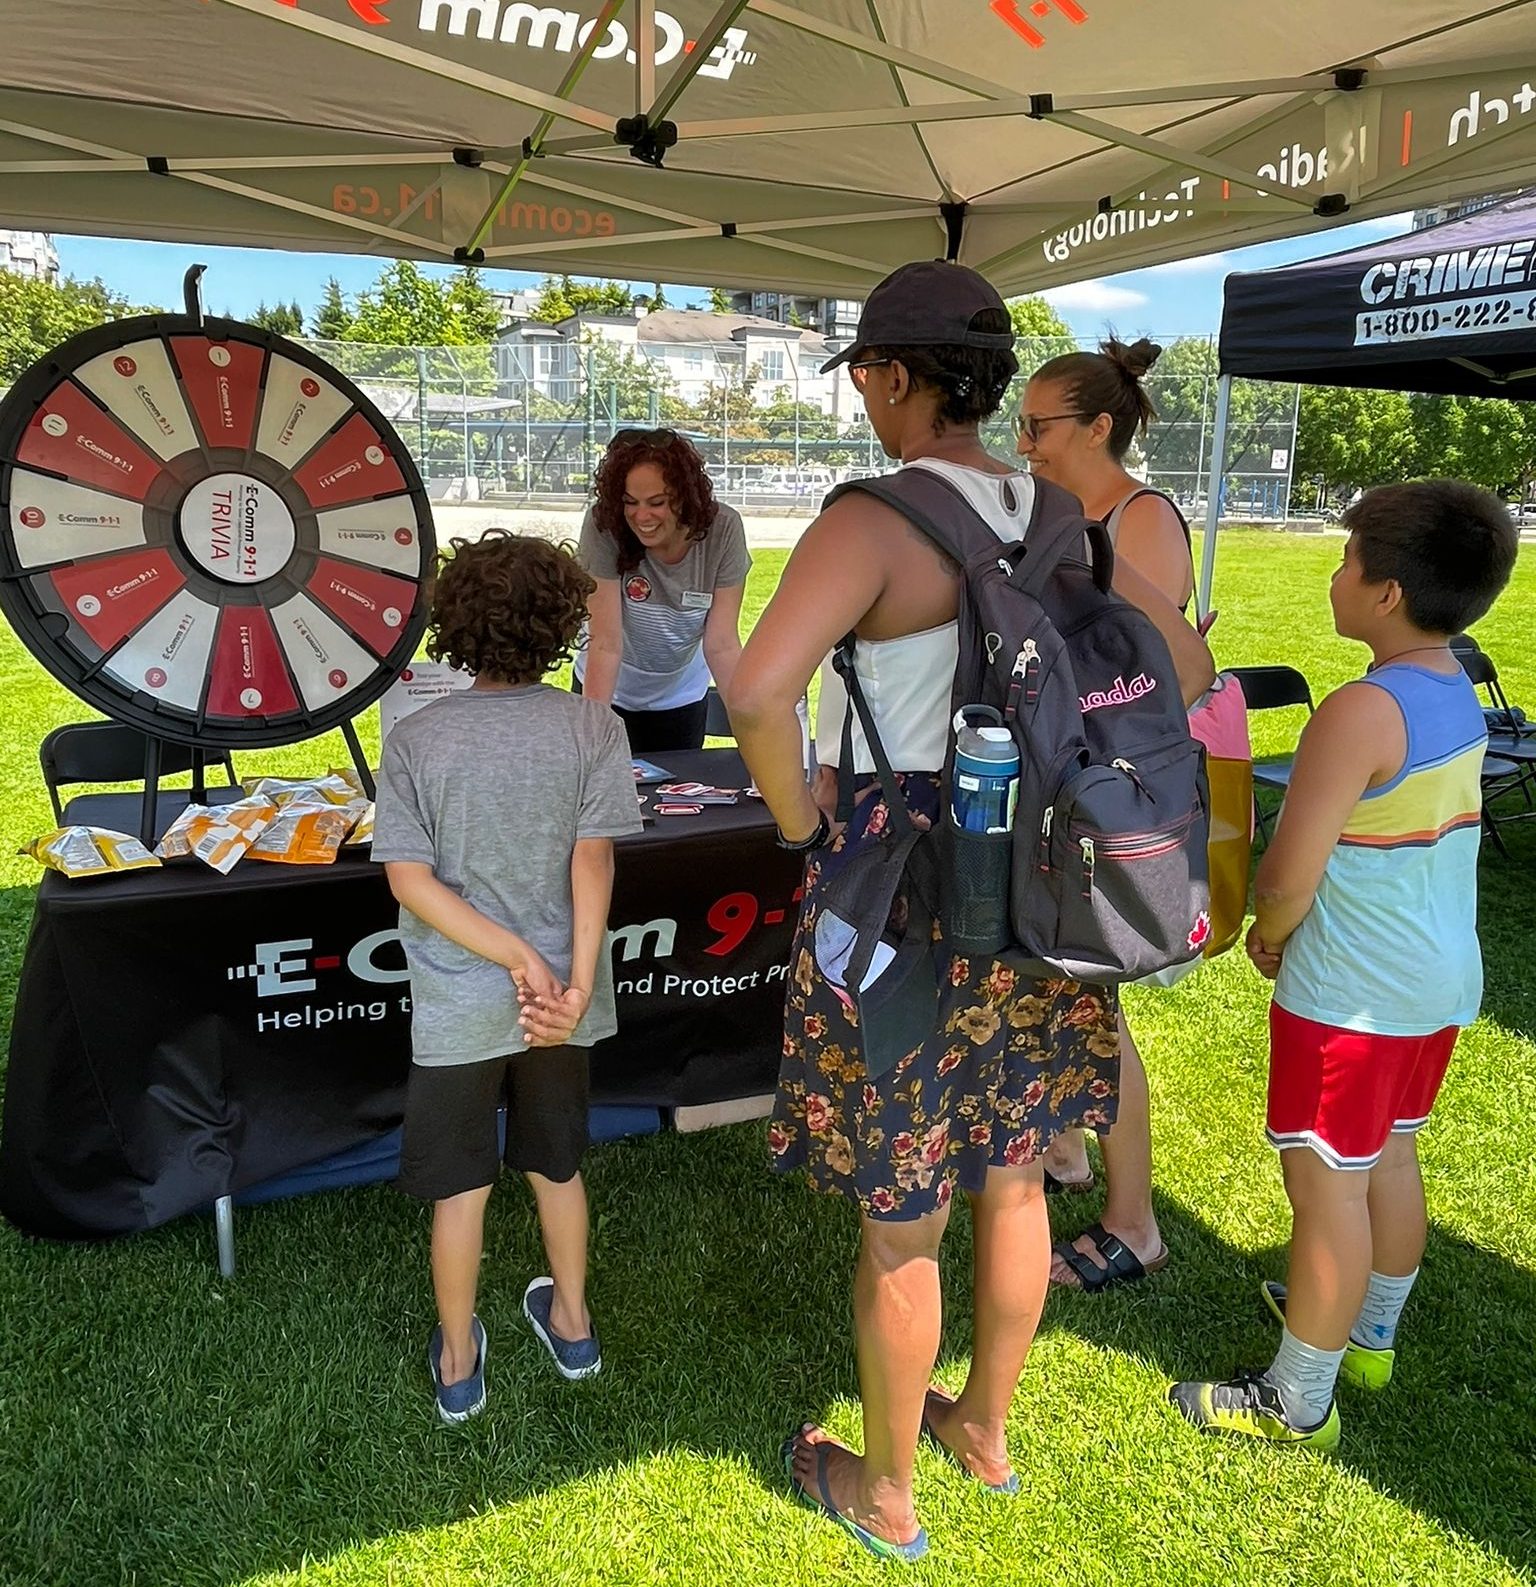 Communications Manager Kaila Butler sharing important 9-1-1 information with visitors at Collingwood Days on July 23 in Vancouver.